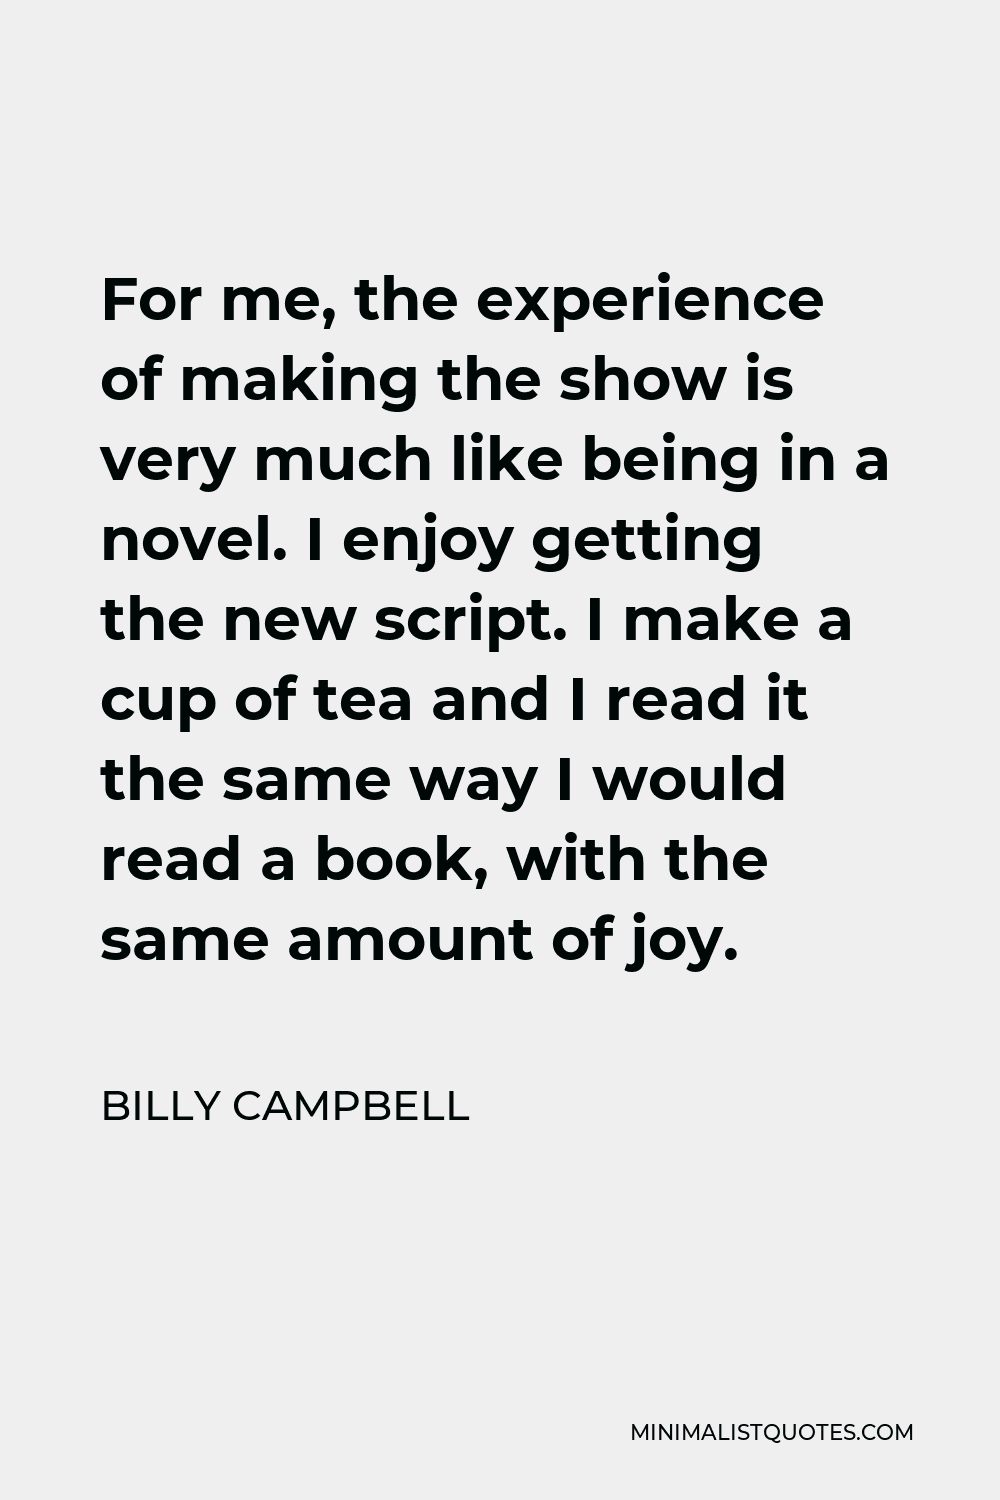 Billy Campbell Quote - For me, the experience of making the show is very much like being in a novel. I enjoy getting the new script. I make a cup of tea and I read it the same way I would read a book, with the same amount of joy.